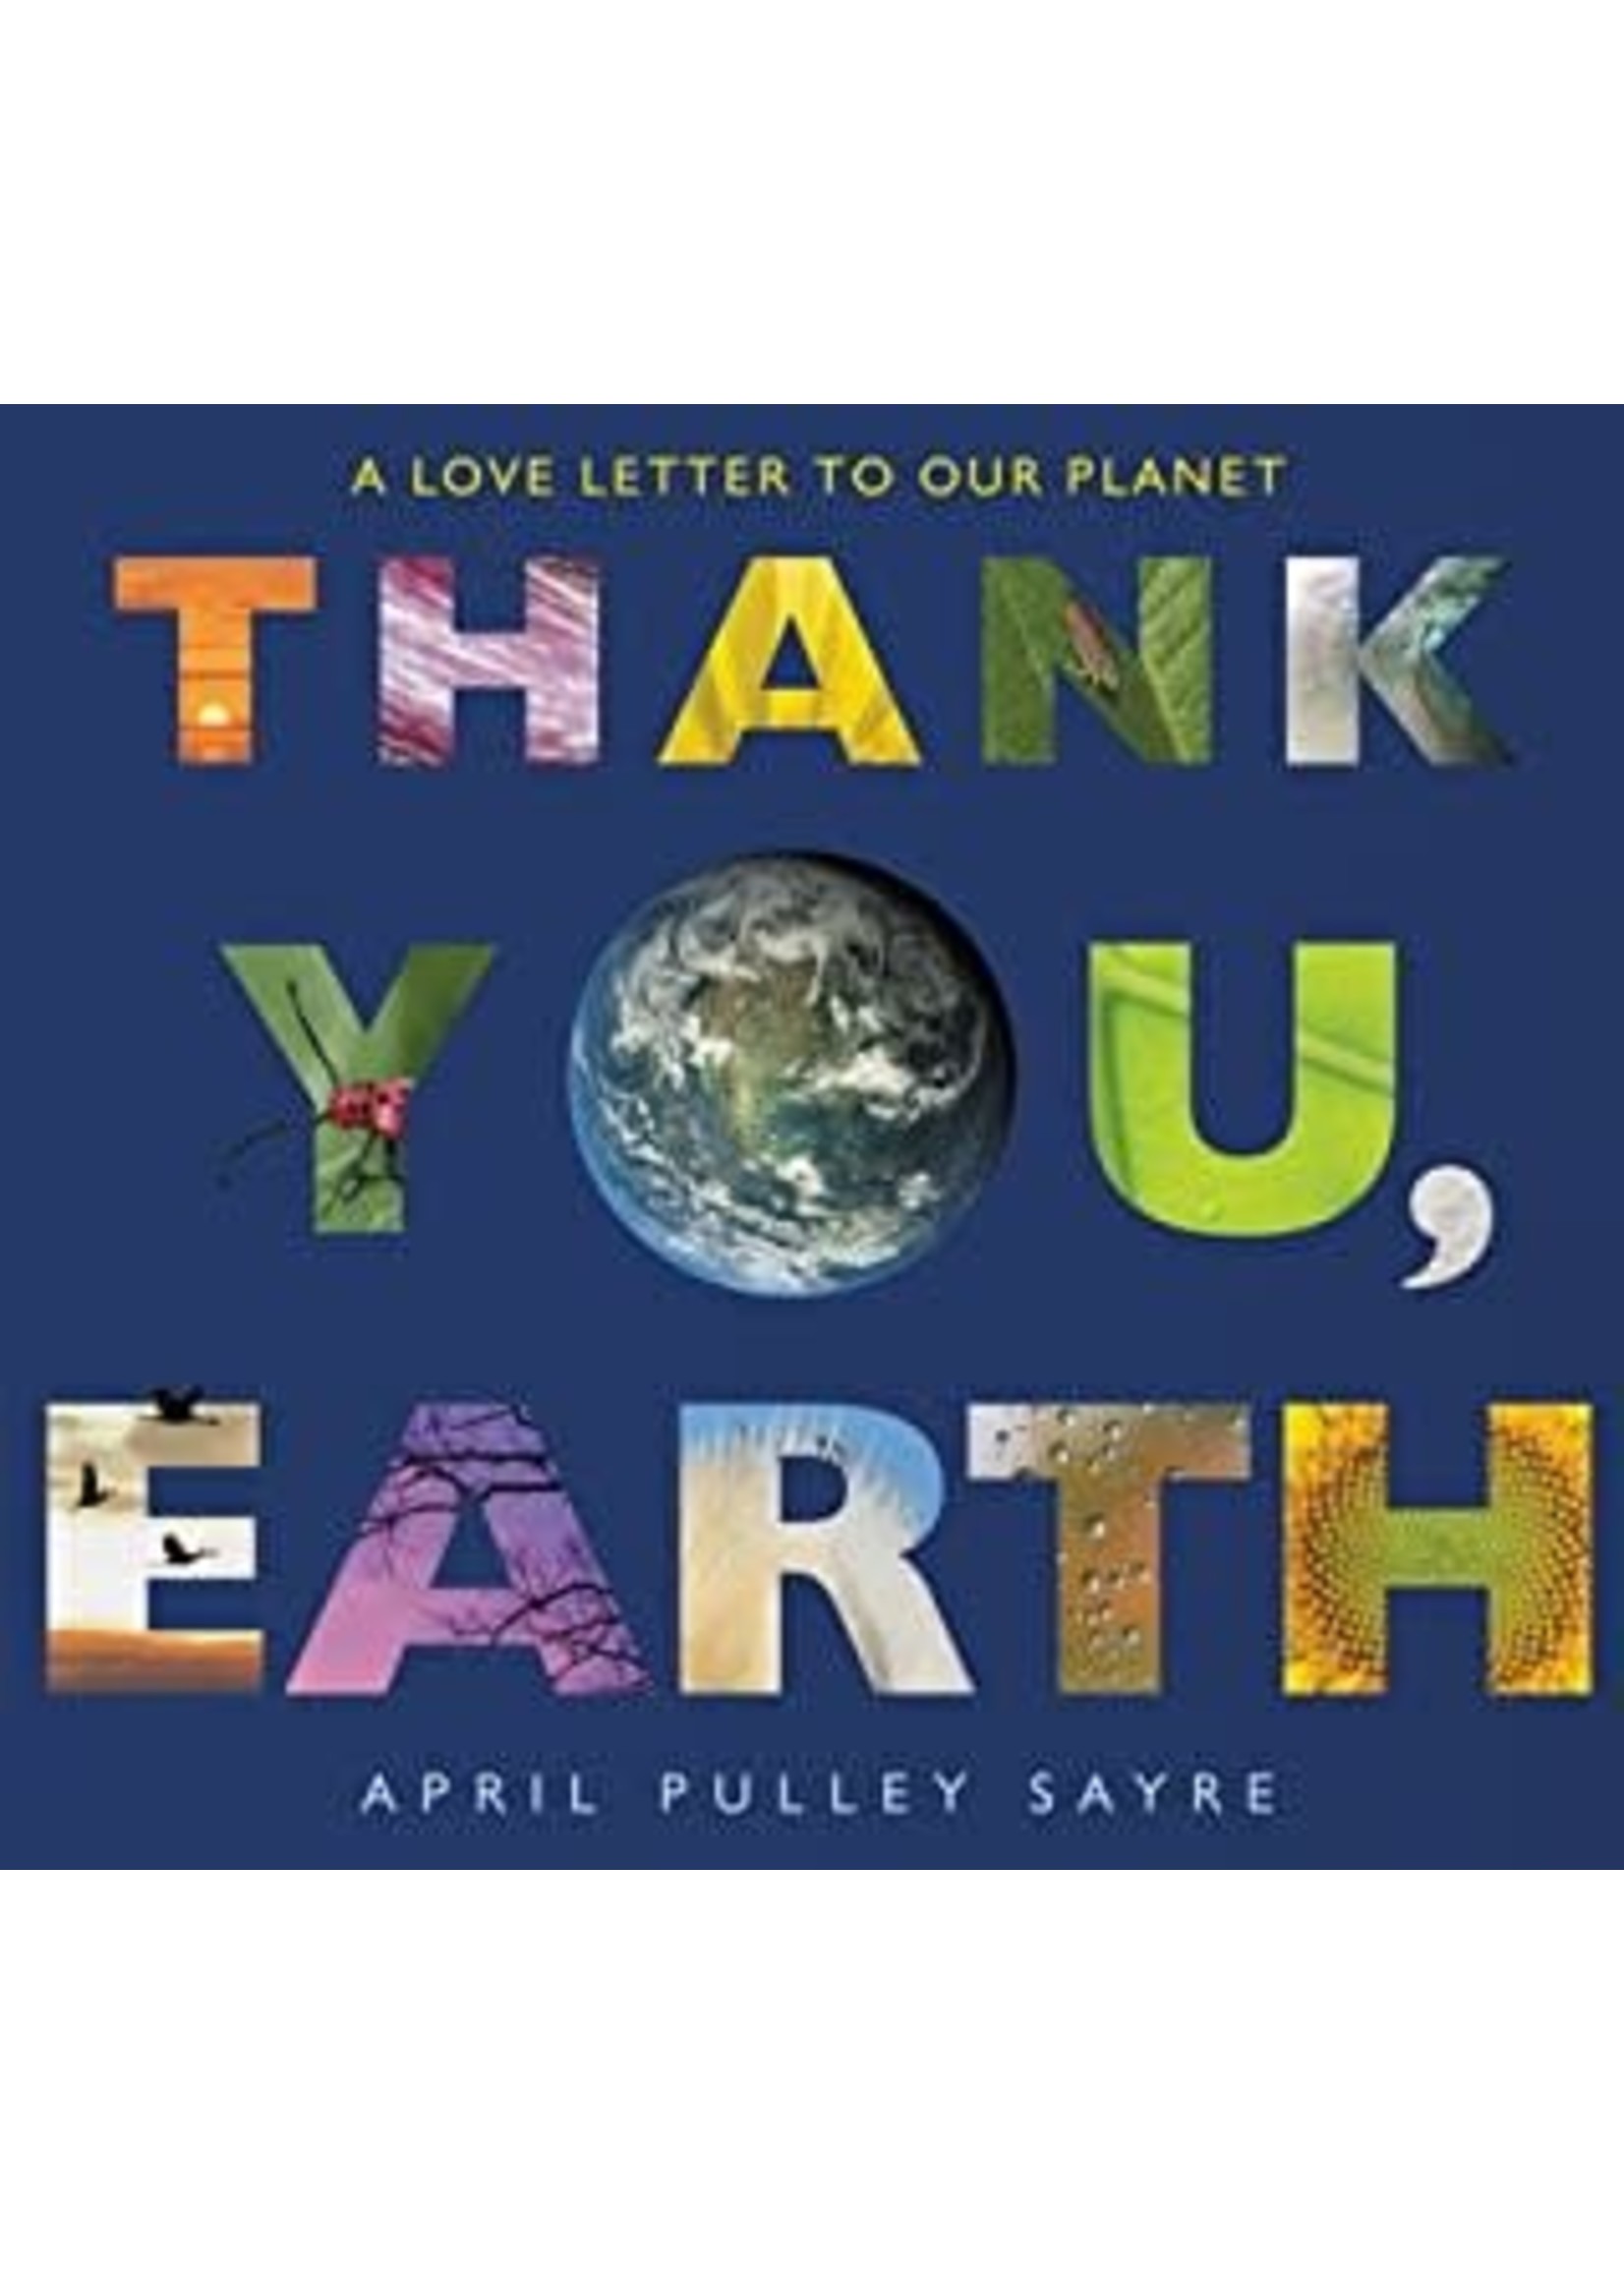 Thank You, Earth: A Love Letter to Our Planet by April Pulley Sayre